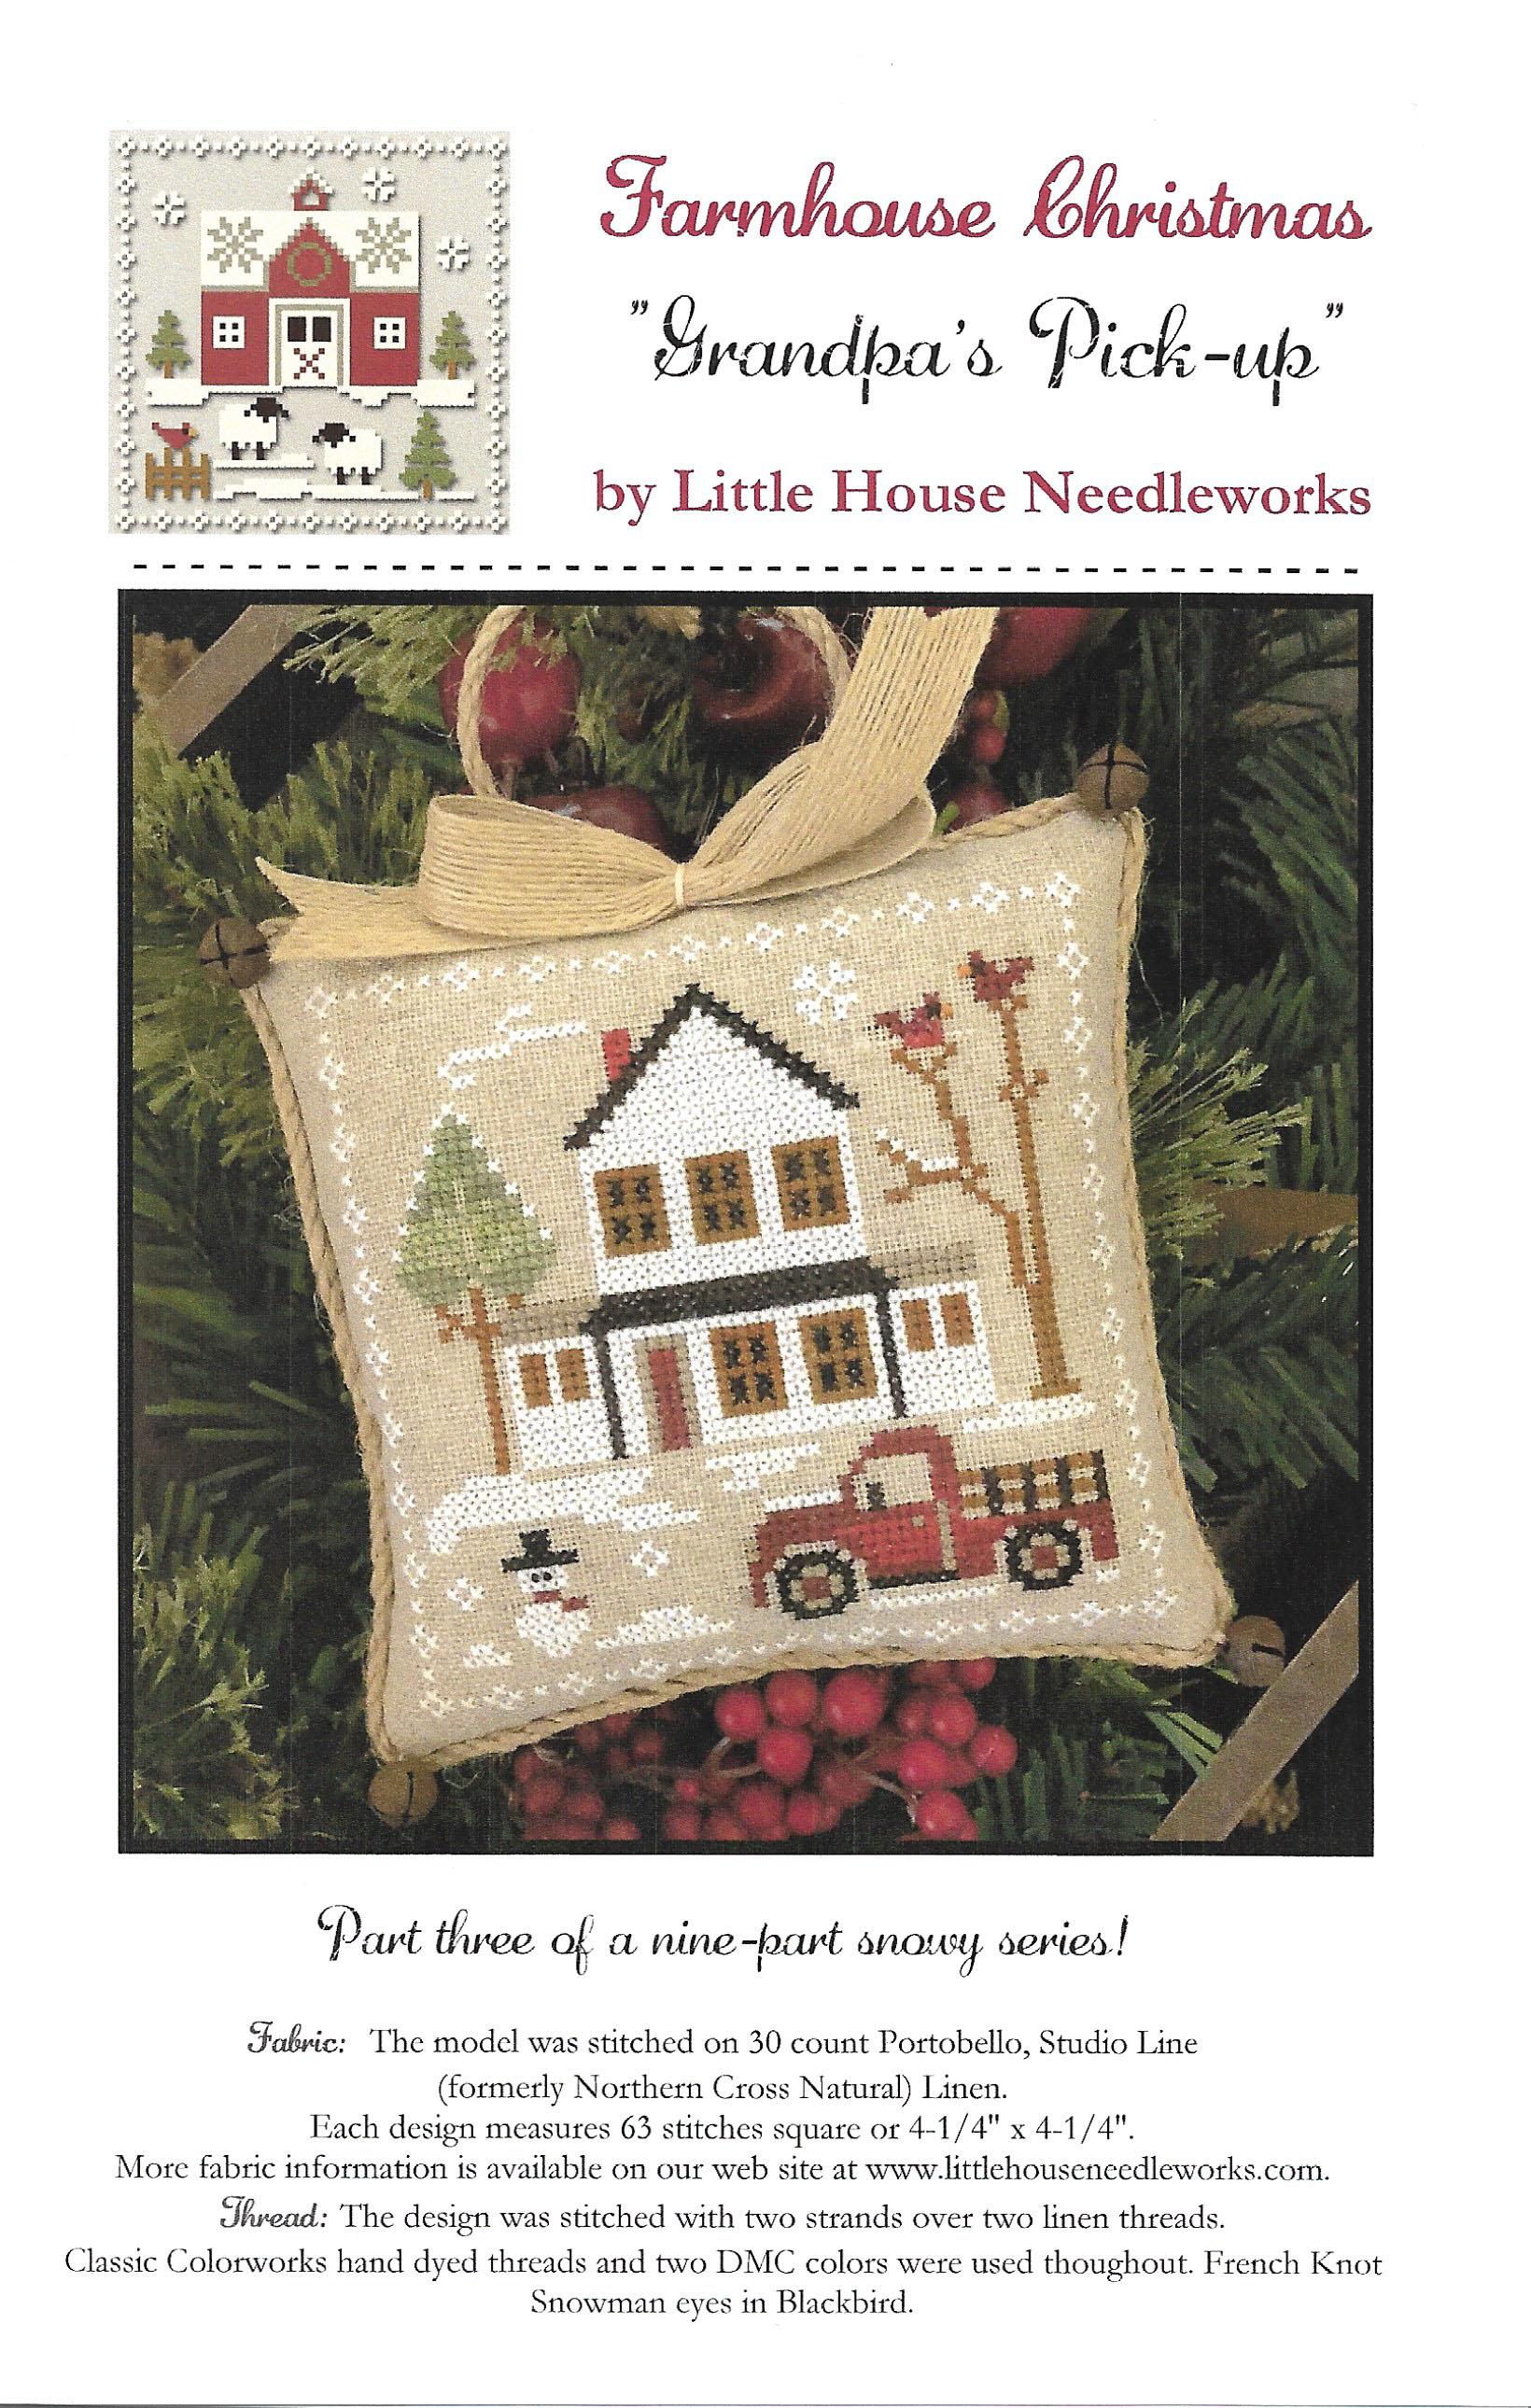 Jack Frost's Tree Farm Part Six Fresh Pines by Little House Needleworks